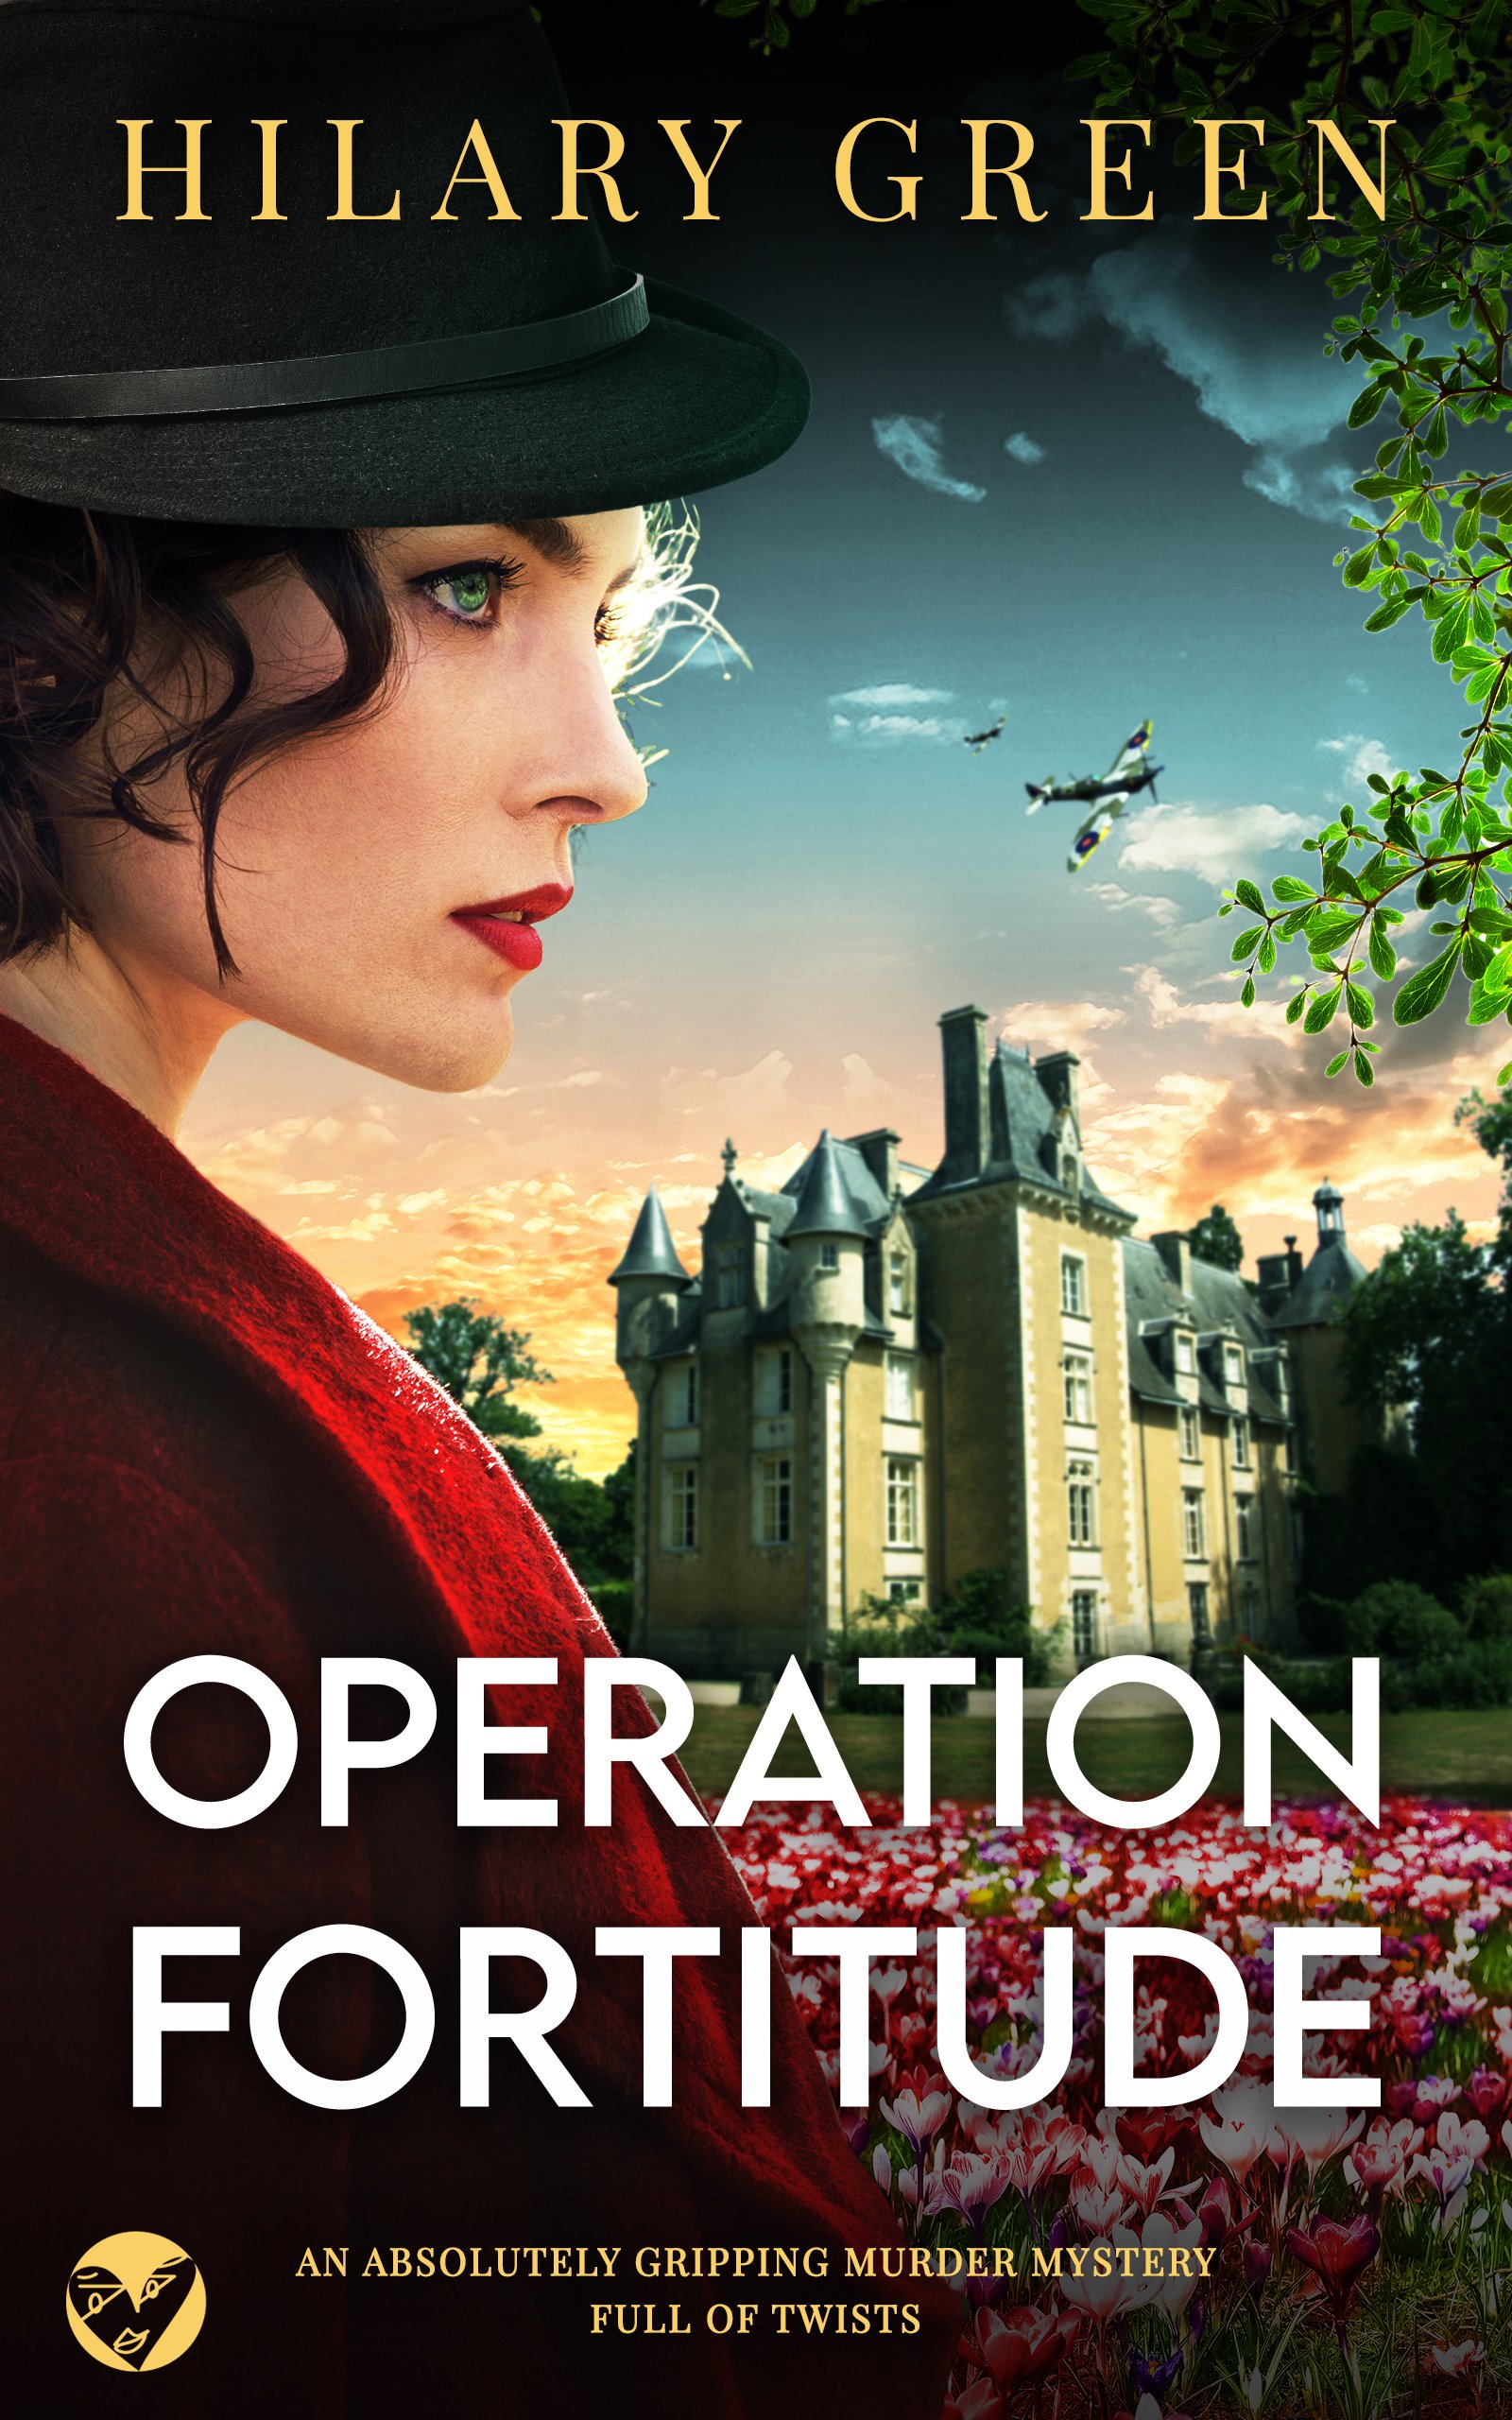 OPERATION FORTITUDE cover publish.jpg